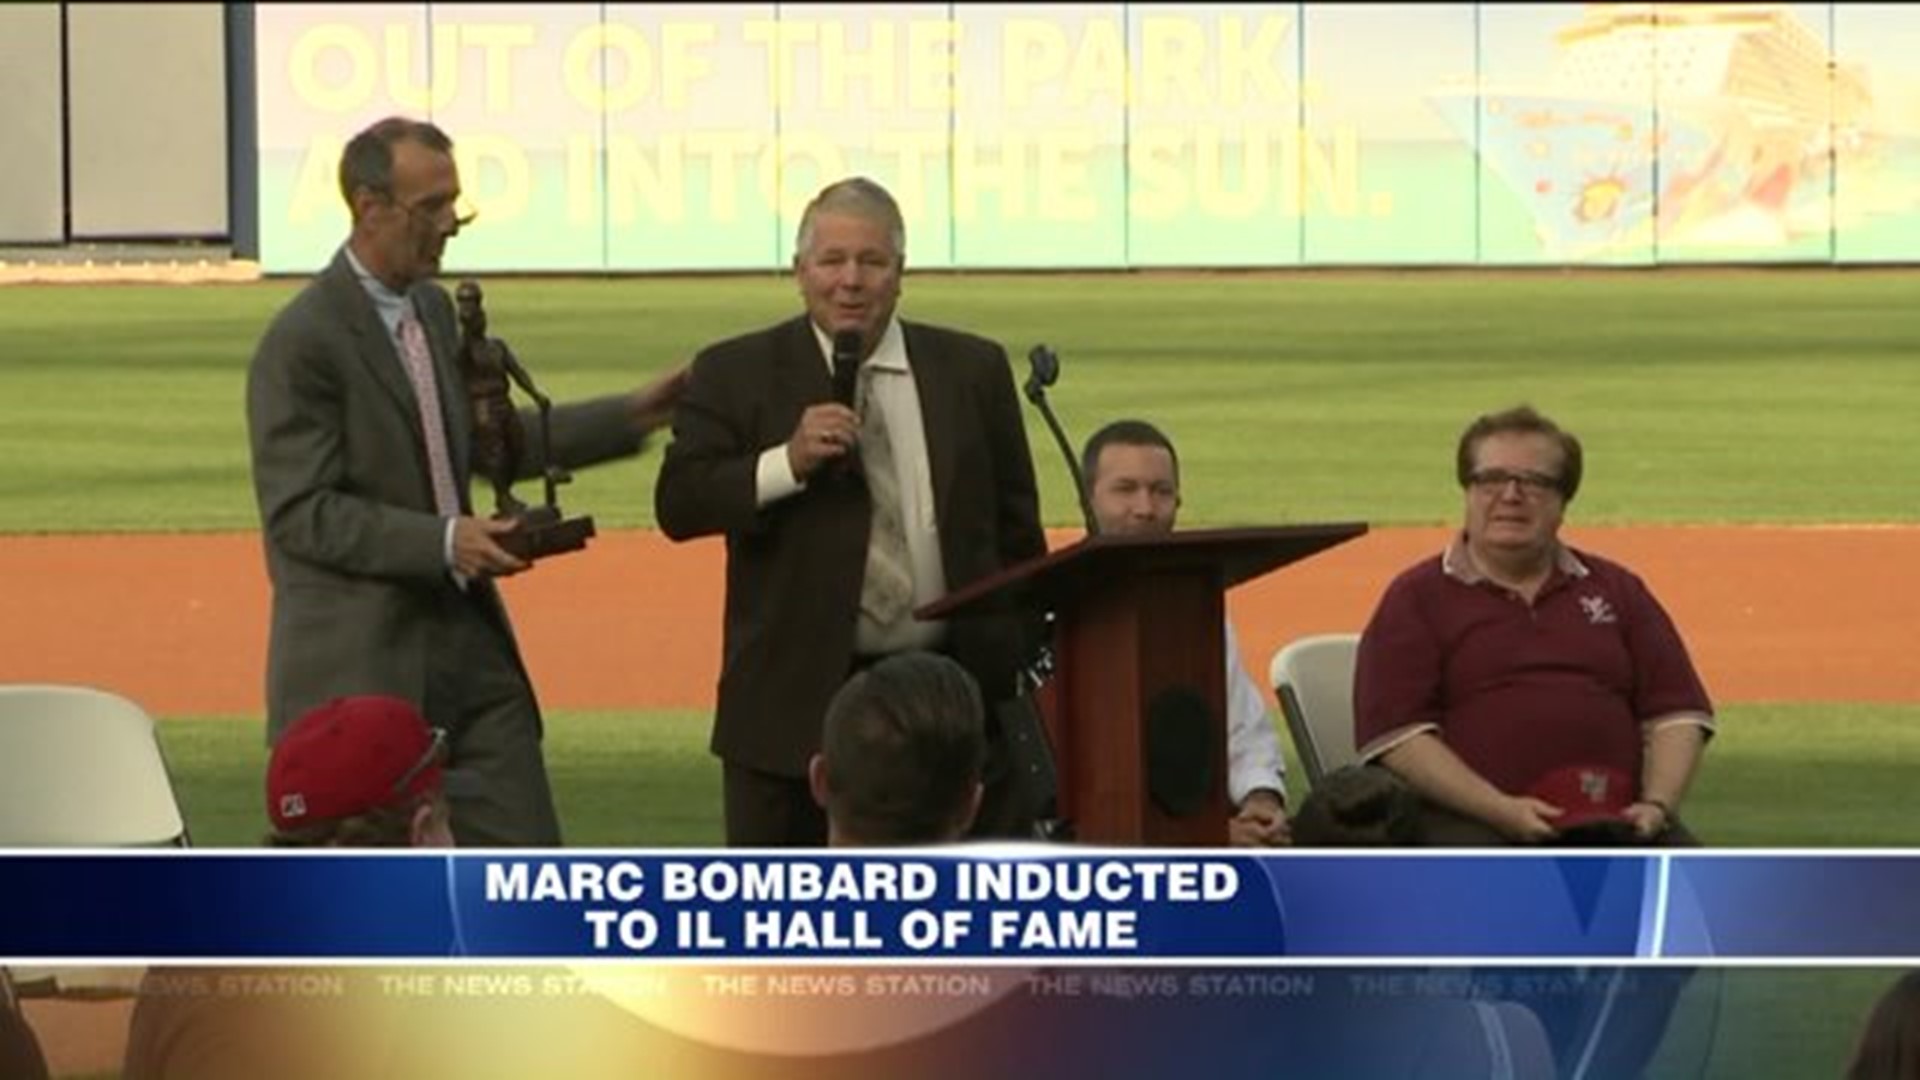 Marc Bombard Inducted to IL Hall of Fame